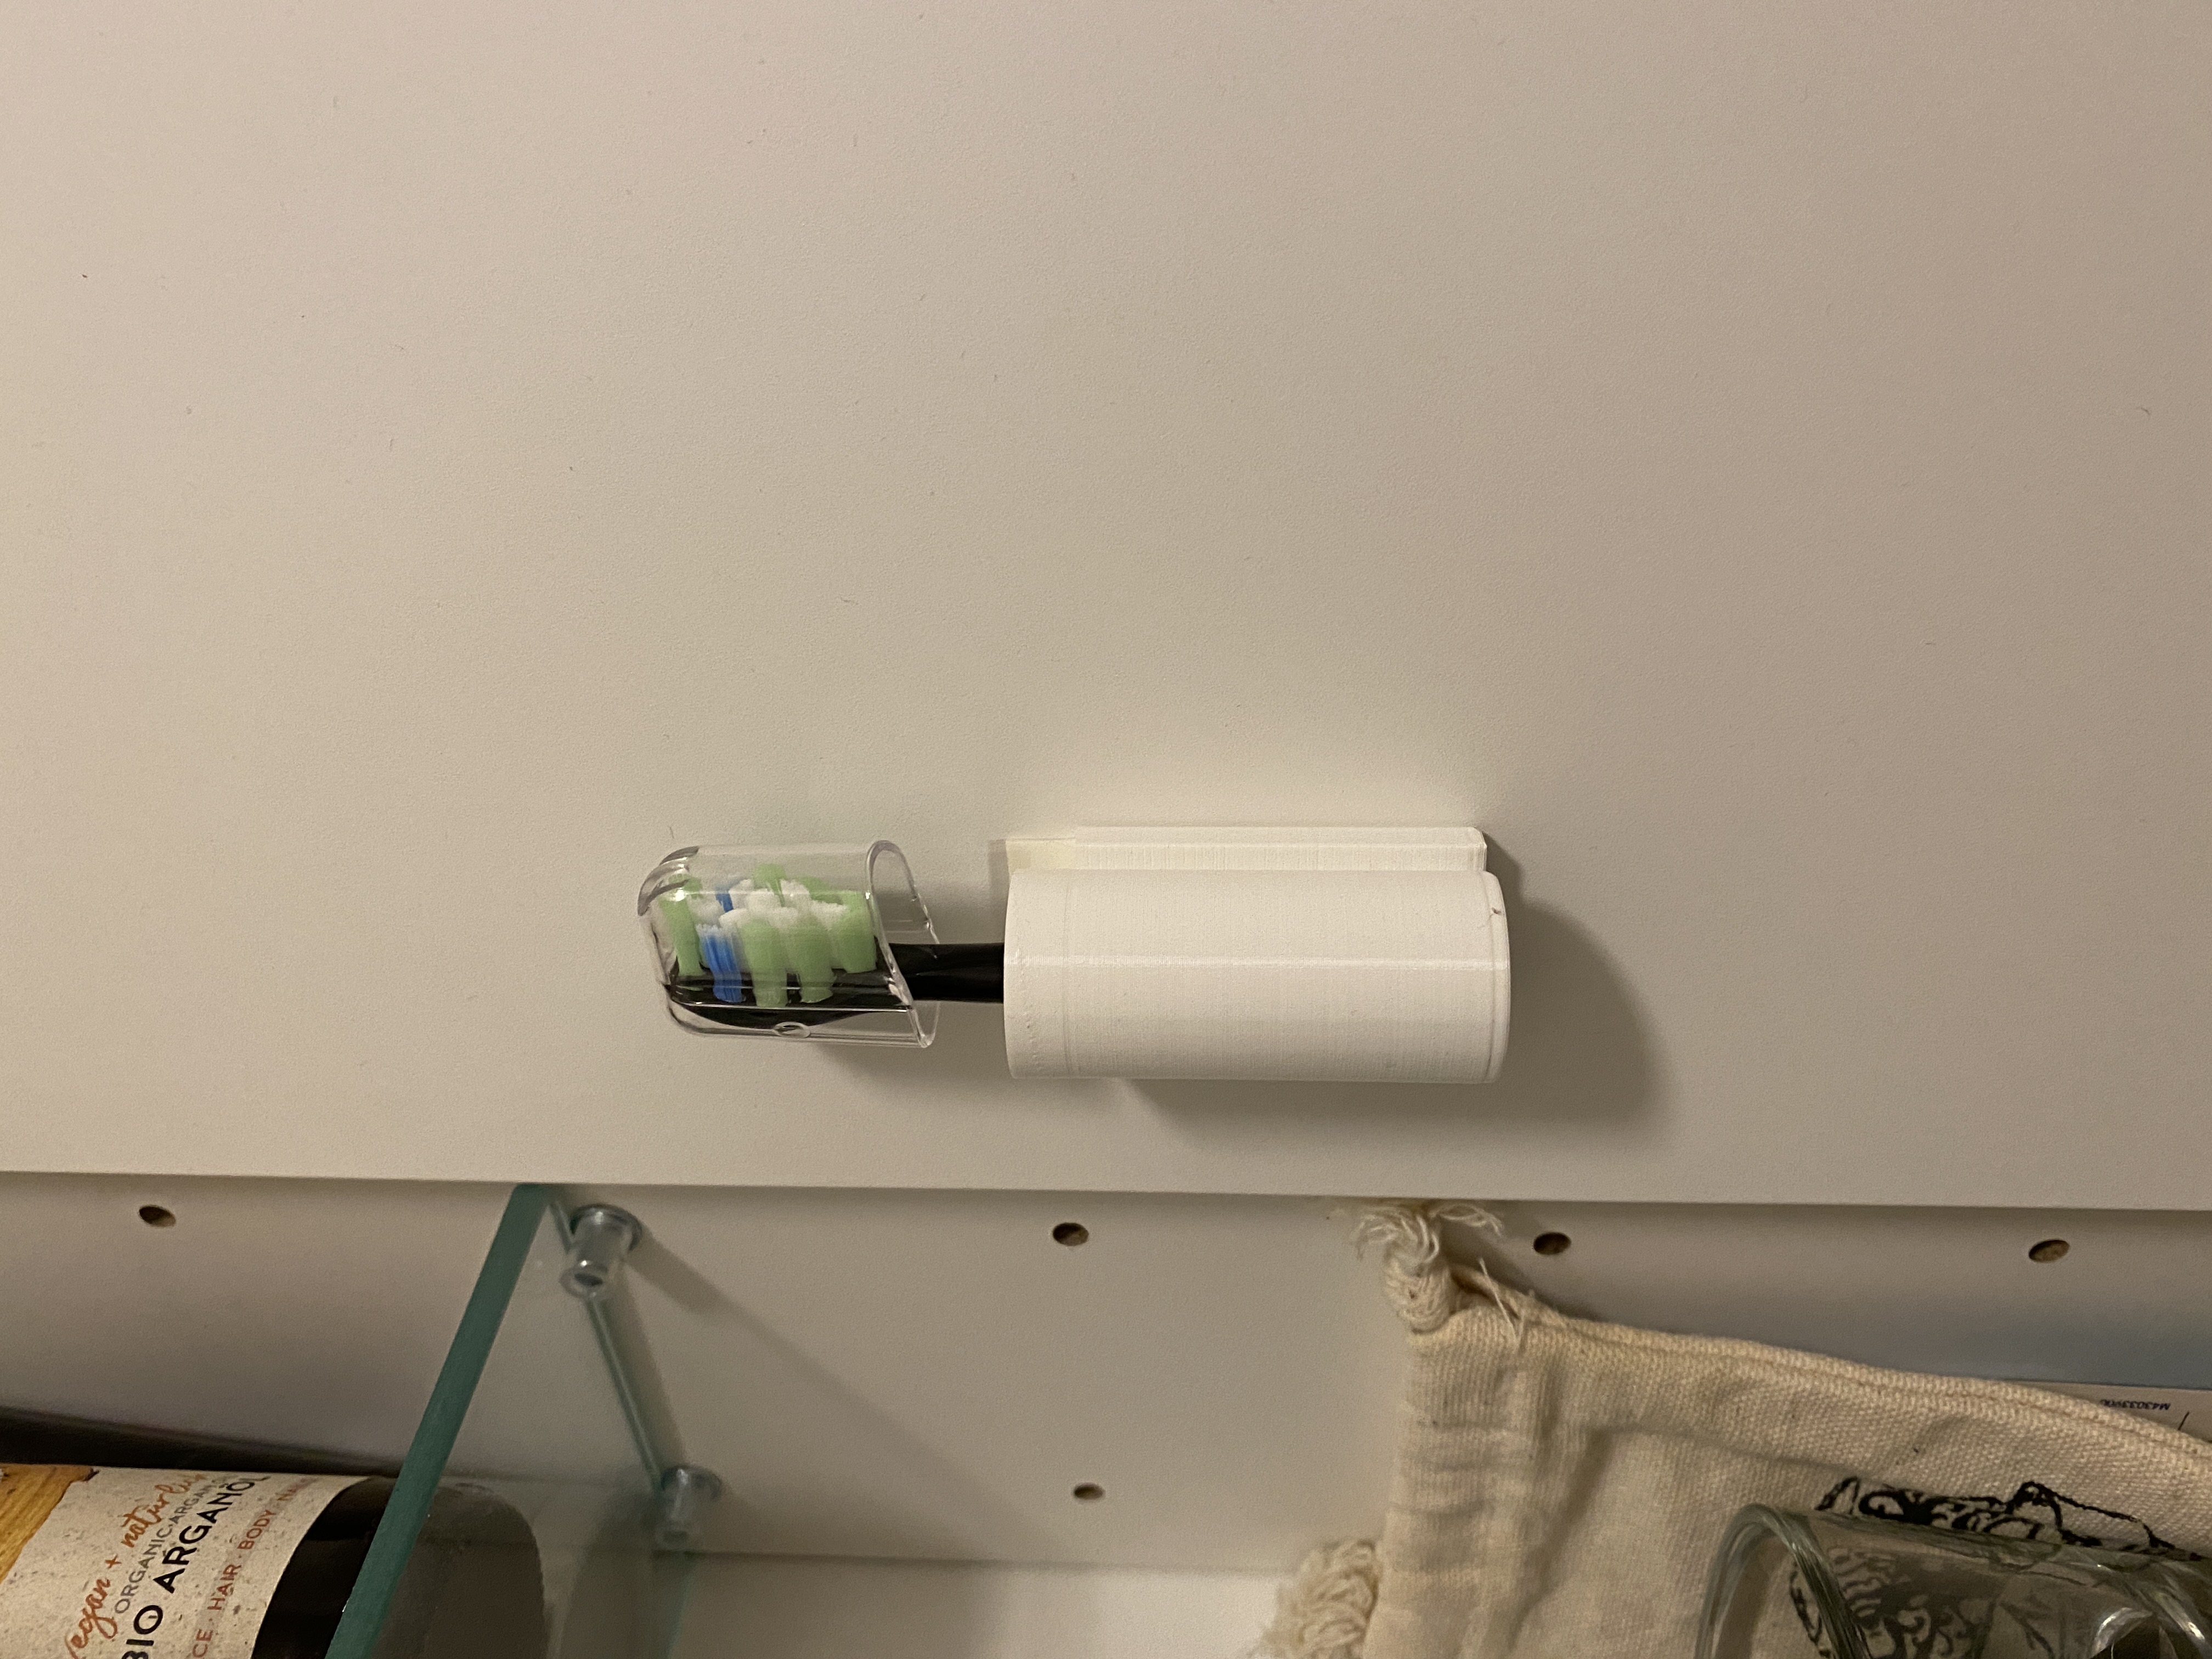 Mount for electrical tooth brush head